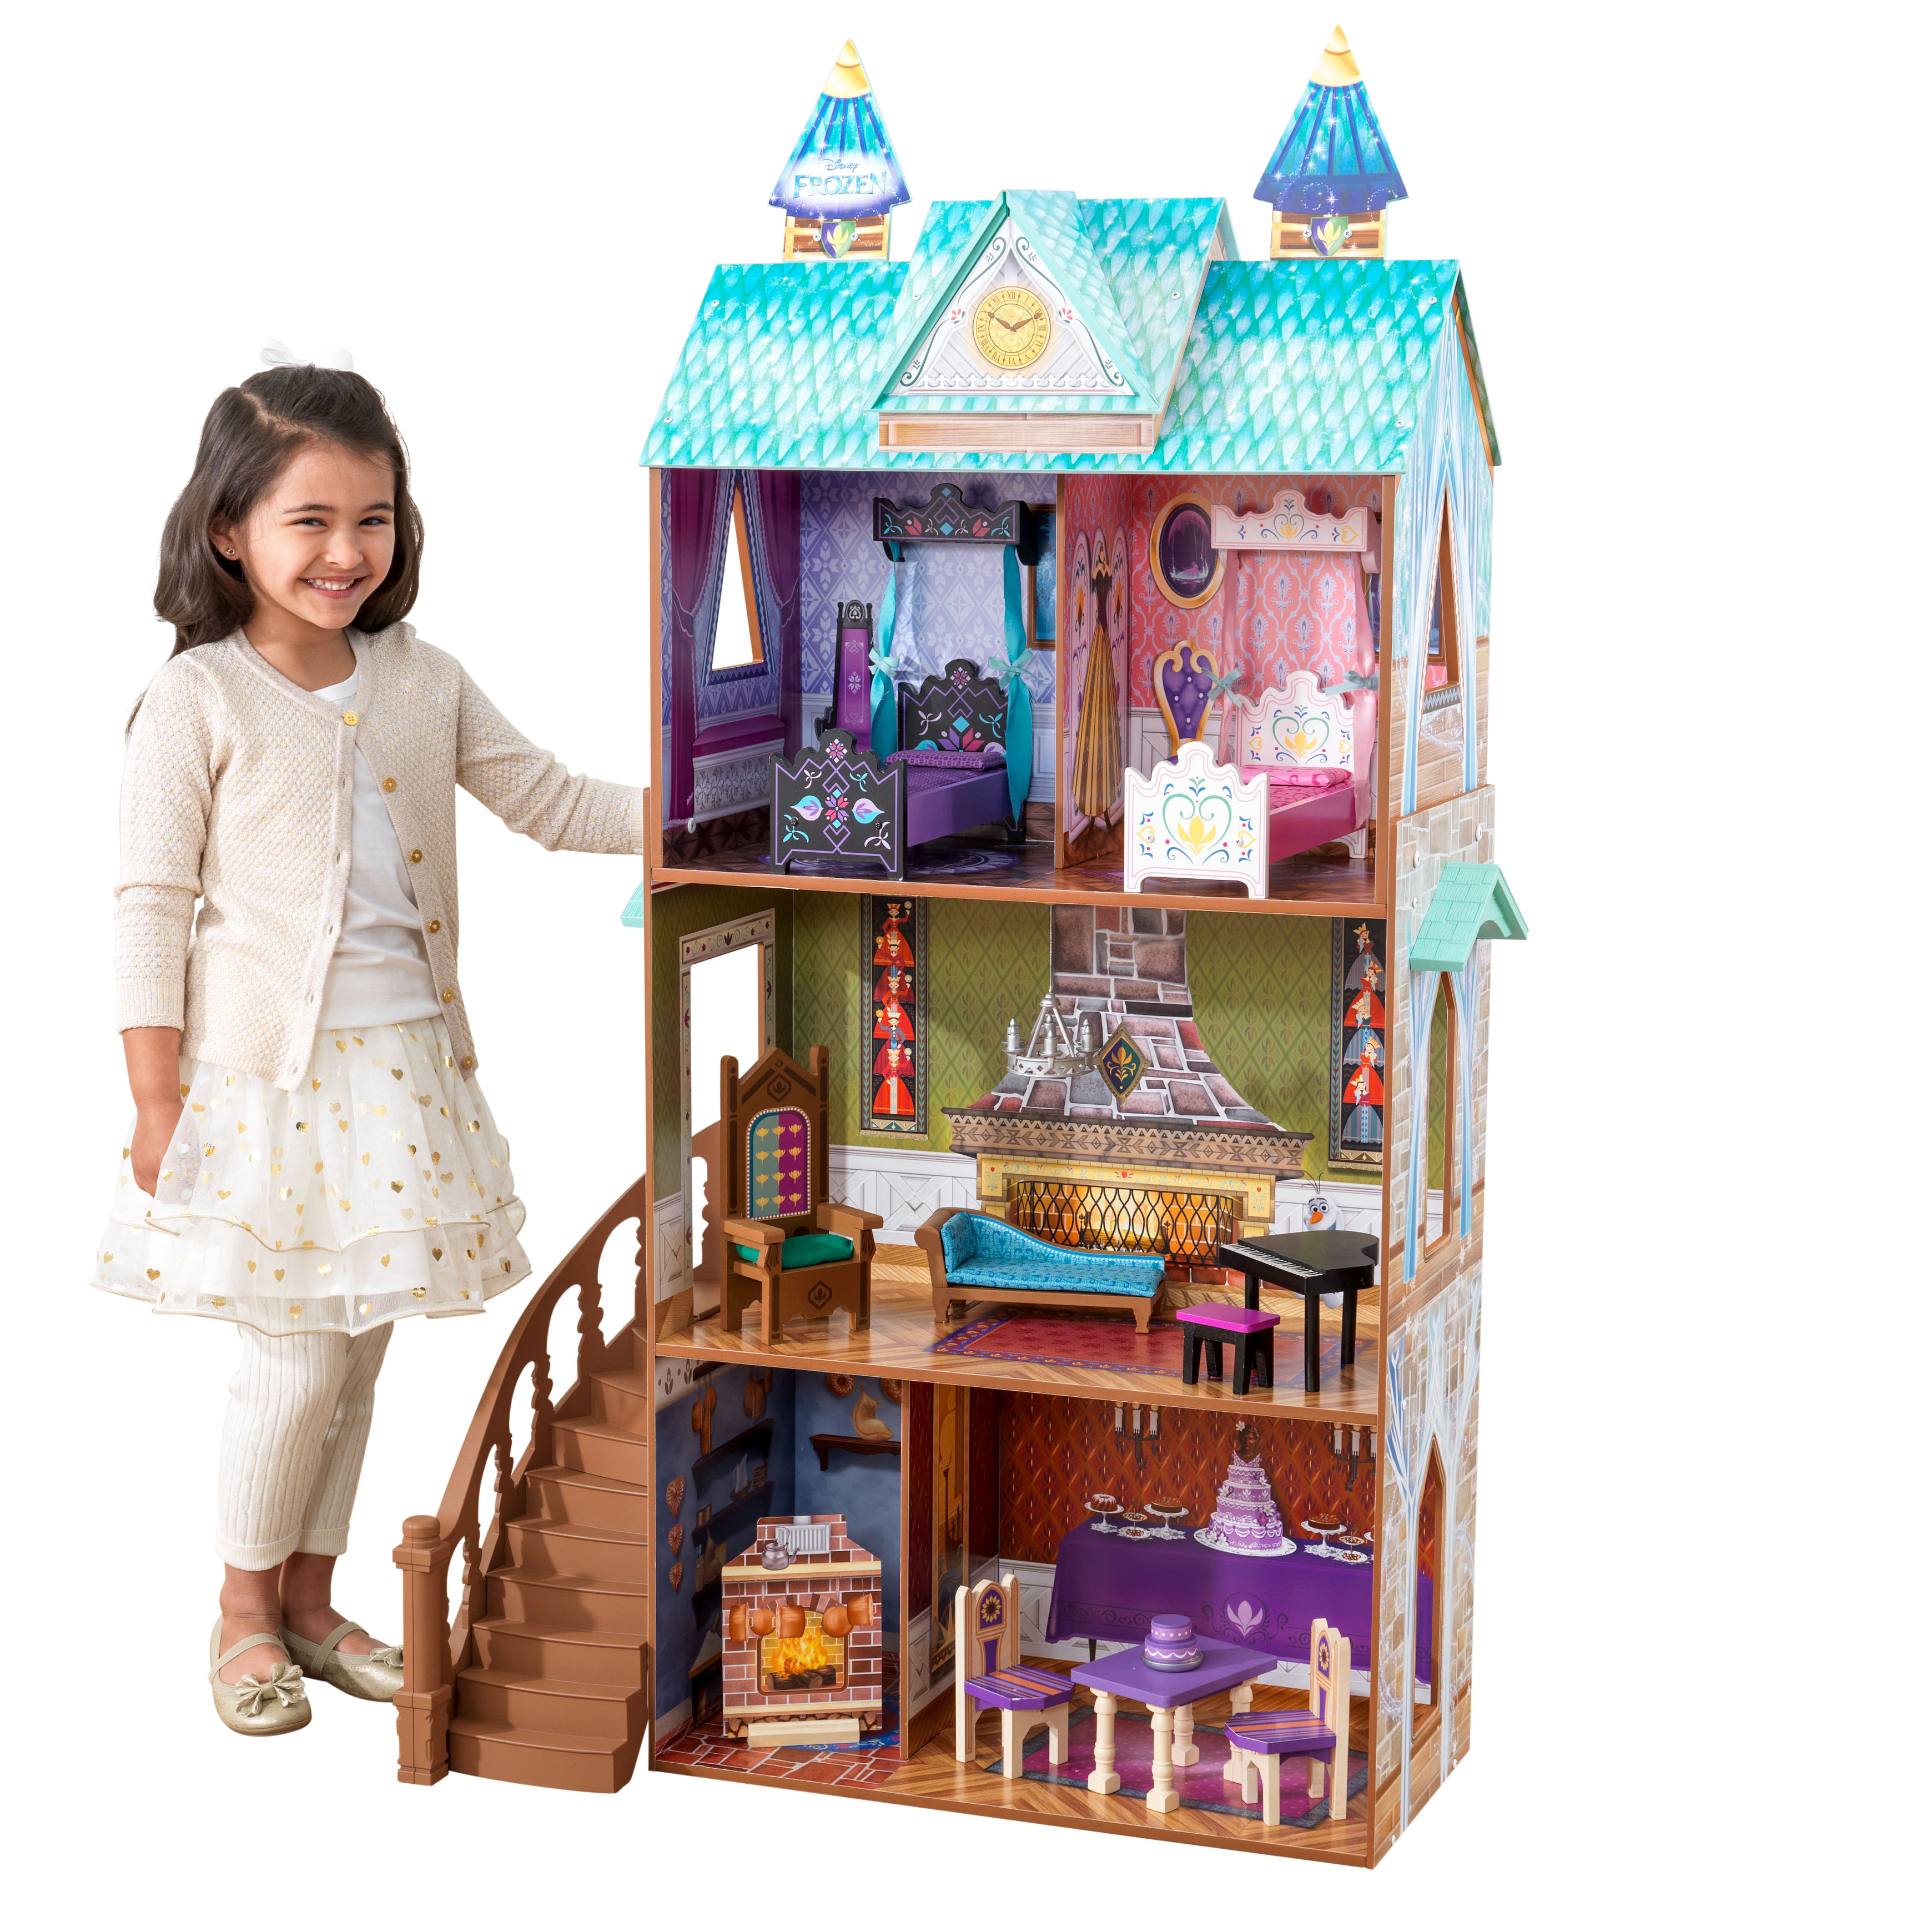 Disney Frozen Arendelle Palace Doll House - image 1 of 2